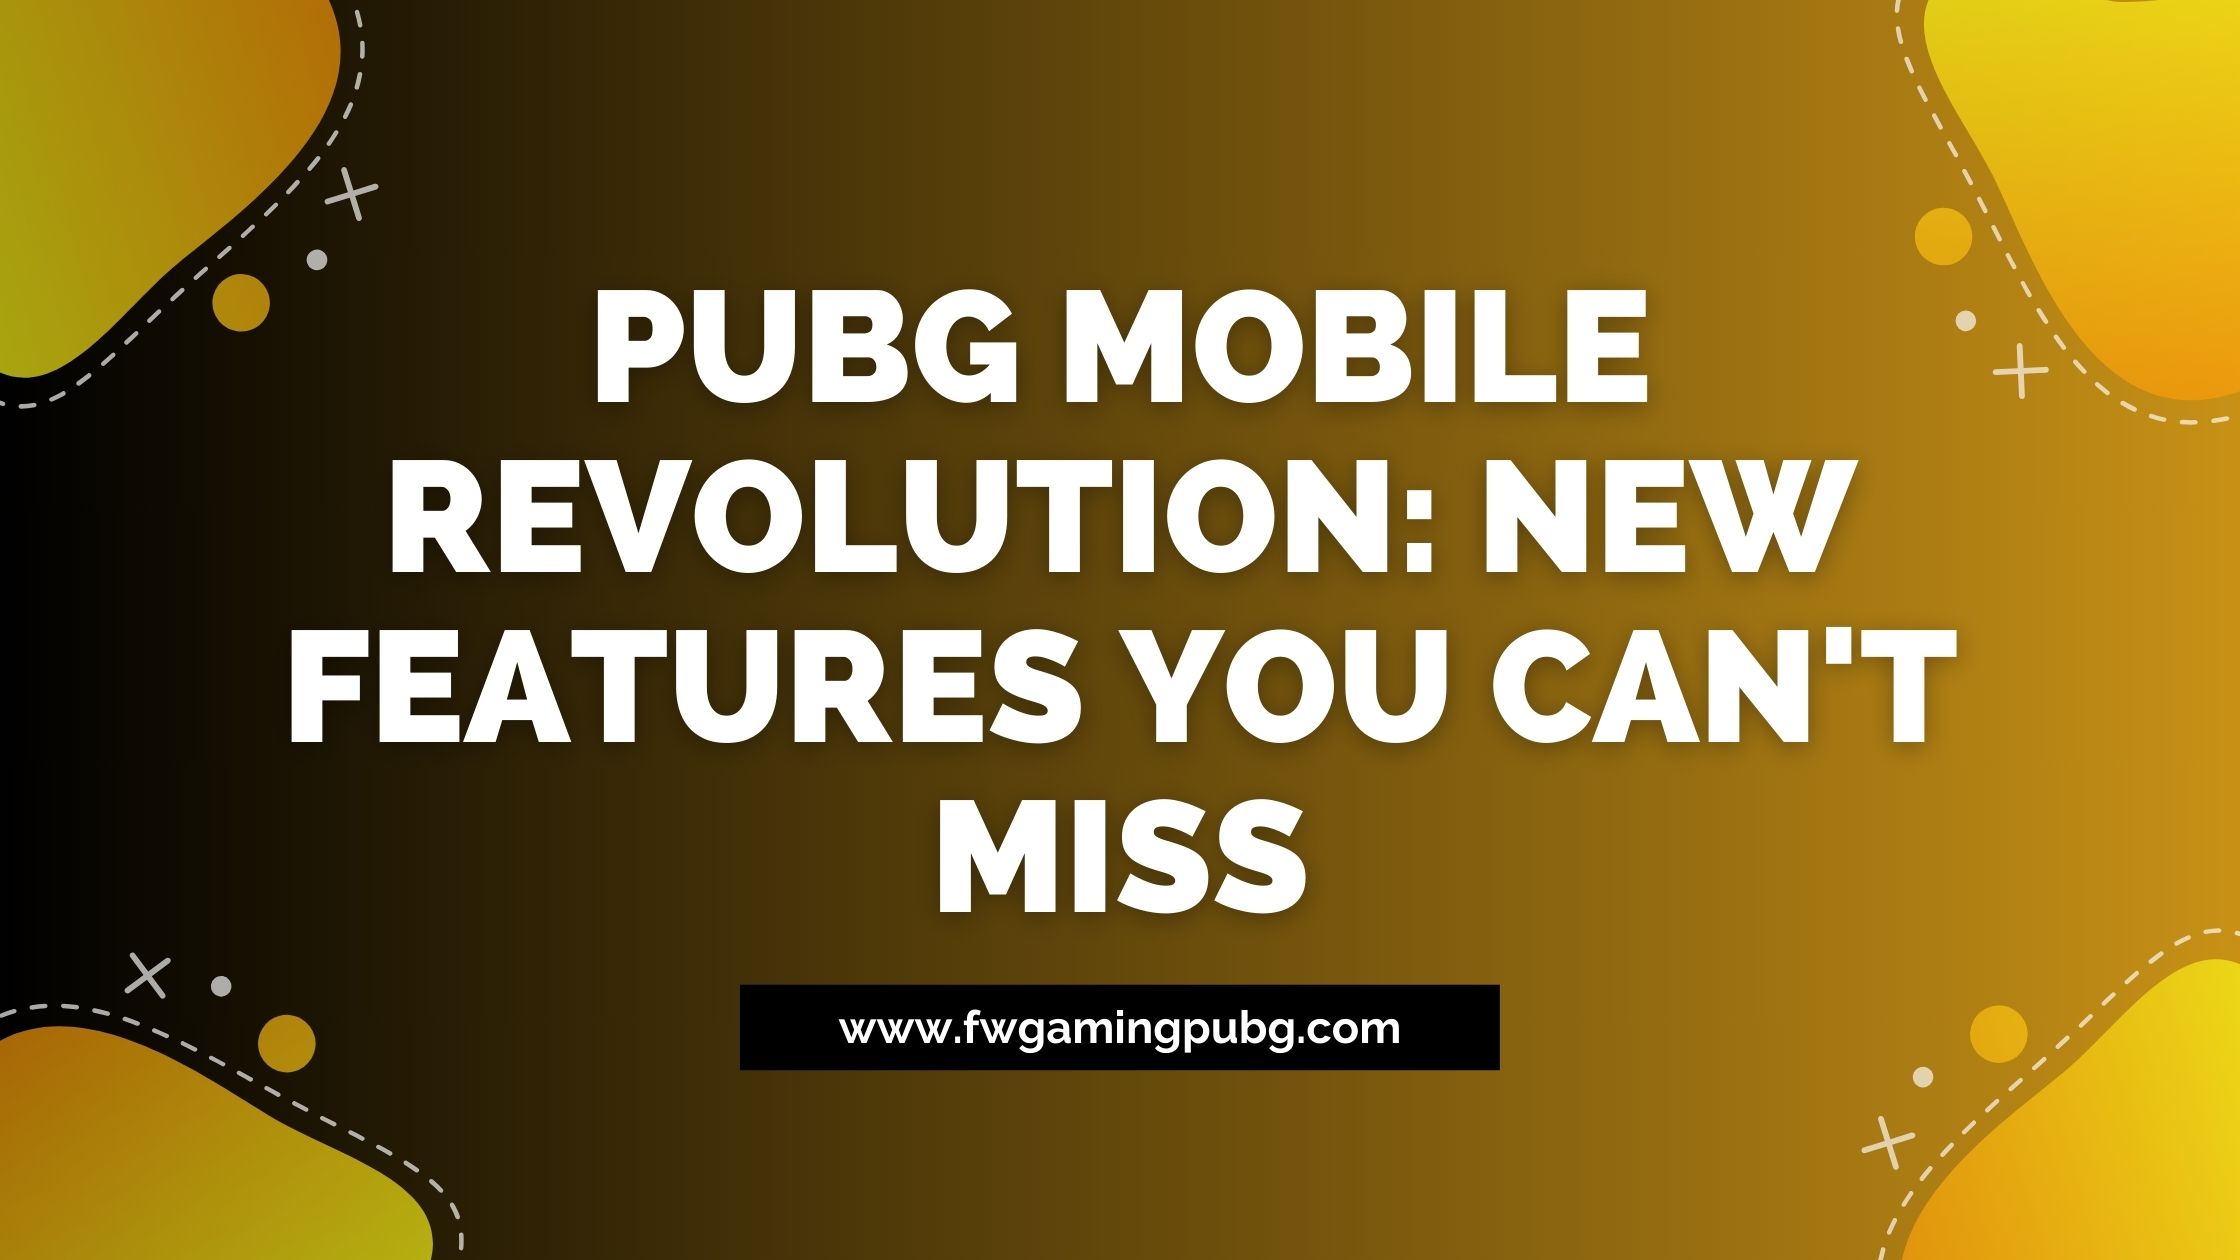 PUBG MOBILE Revolution: New Features You Can’t Miss